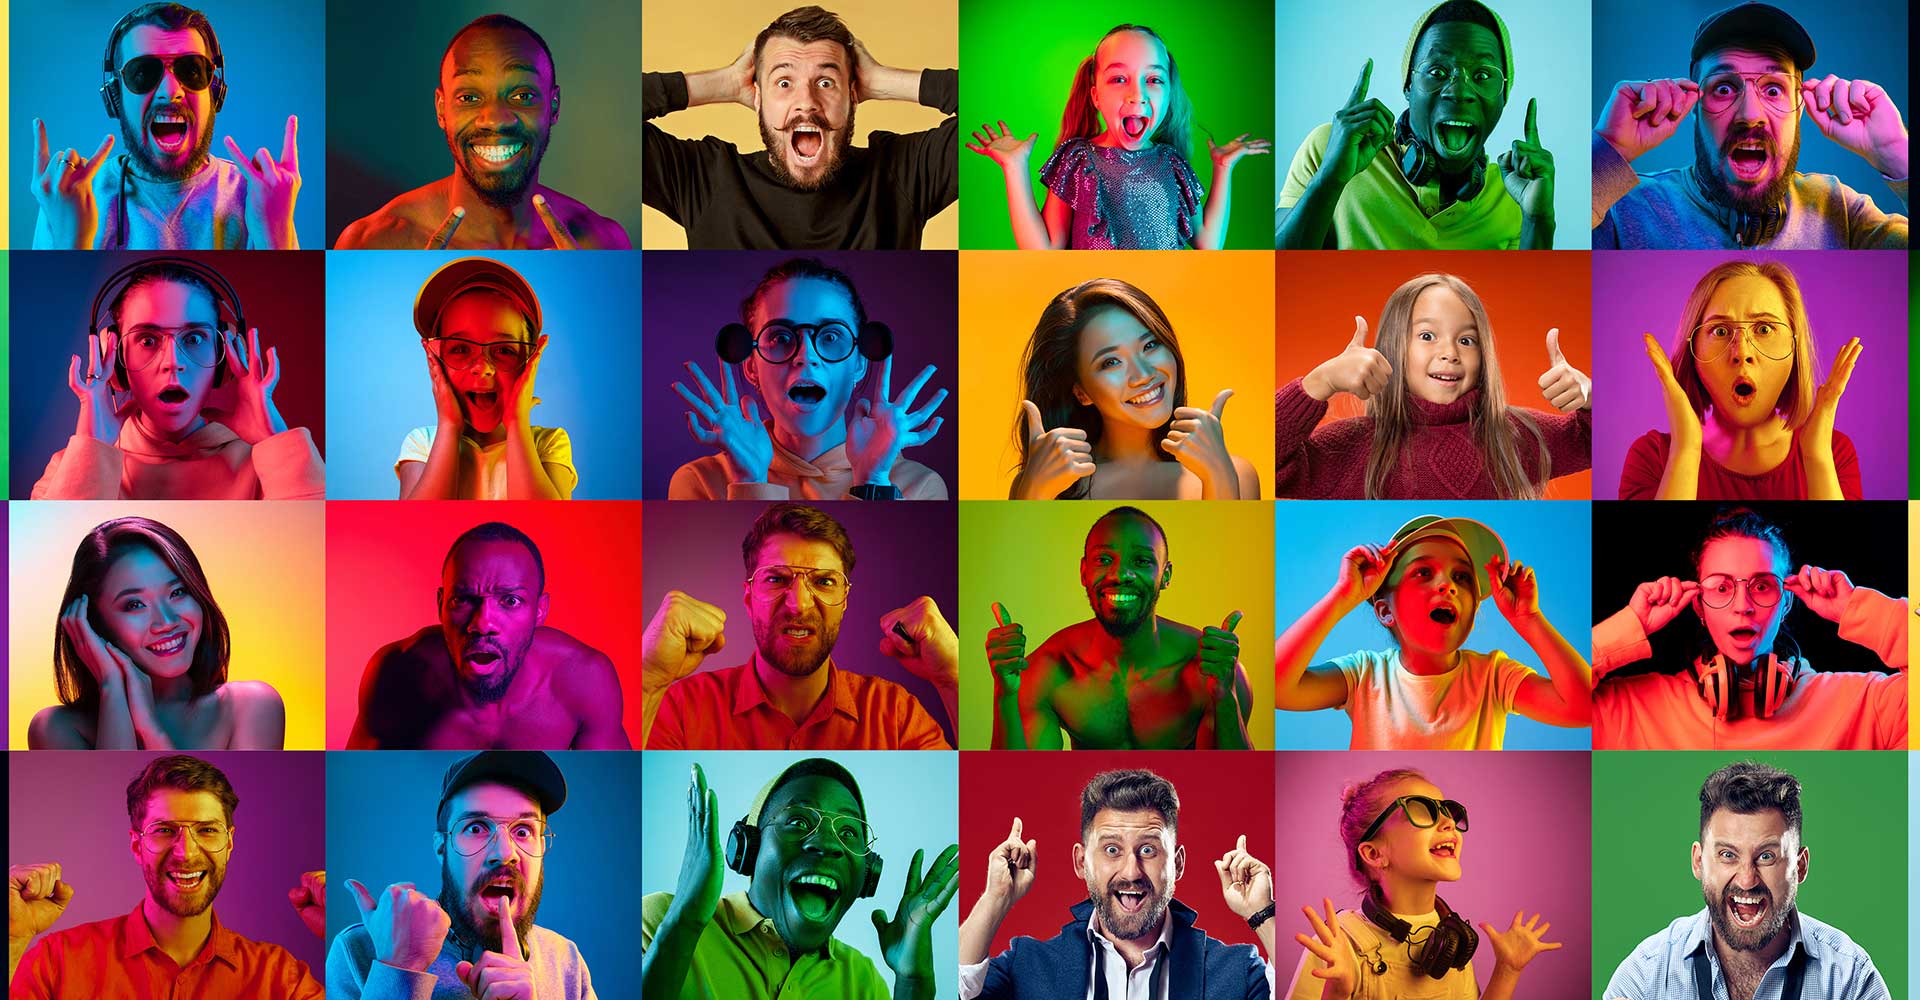 Mosaic image of various people with colorful backgrounds